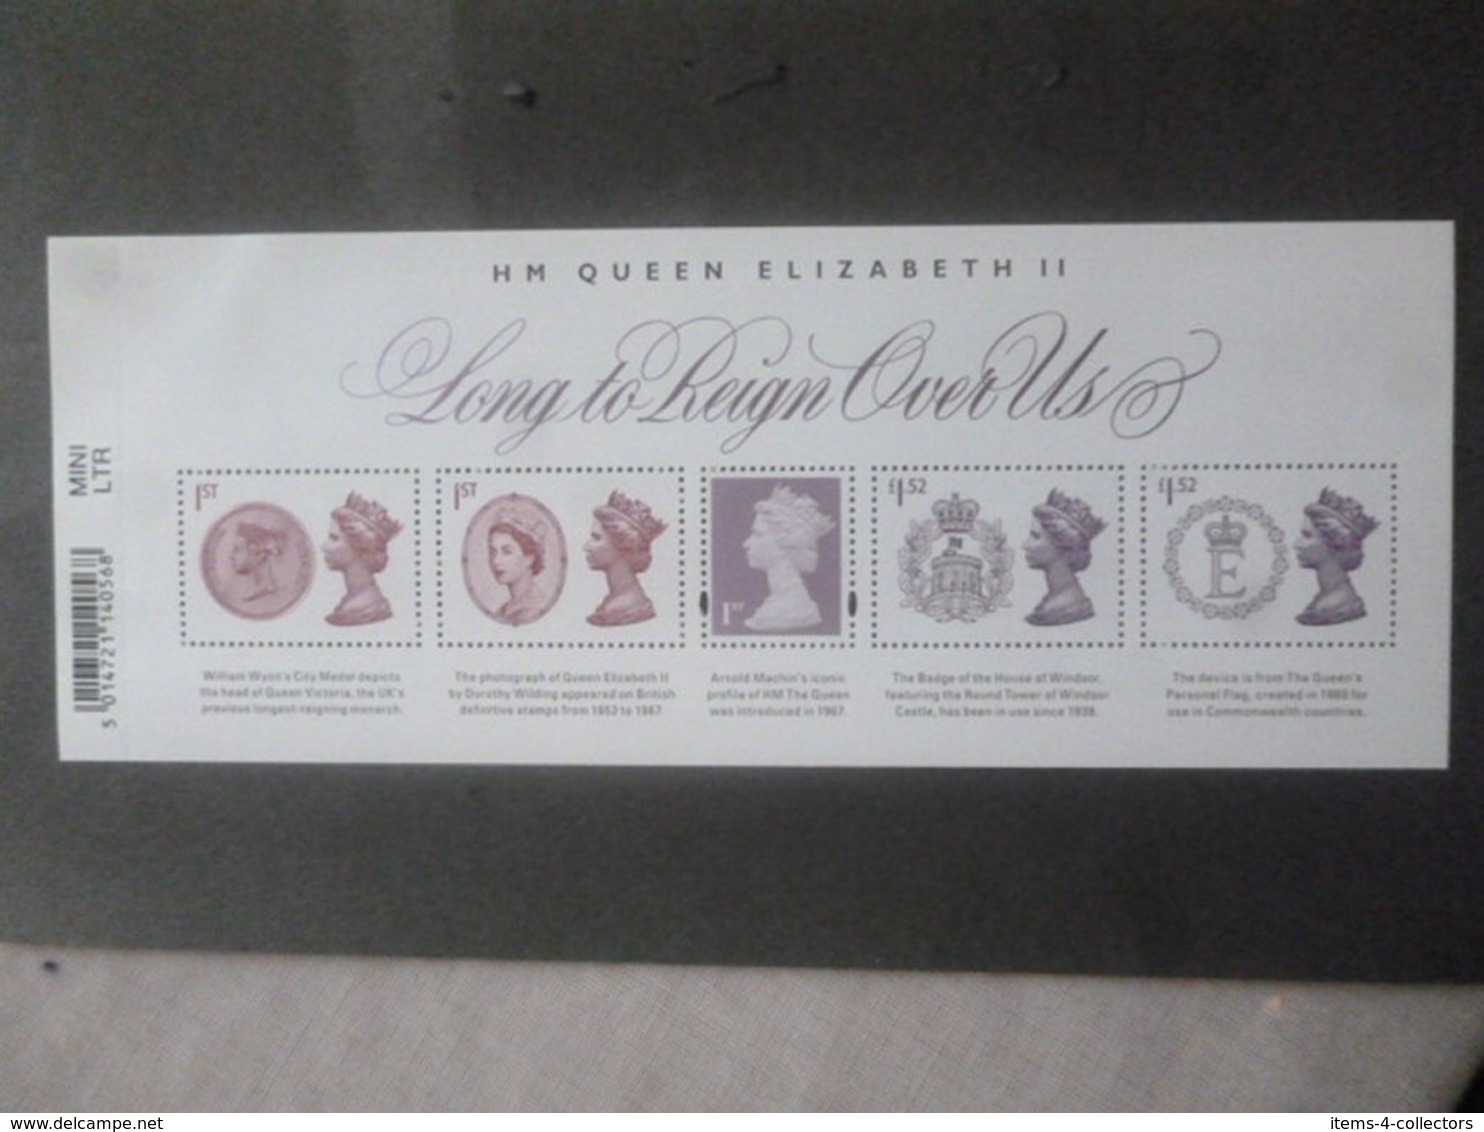 GREAT BRITAIN [UK] SG XXXX LONG TO REIGN OVER US QEII 2015 MS - Sheets, Plate Blocks & Multiples